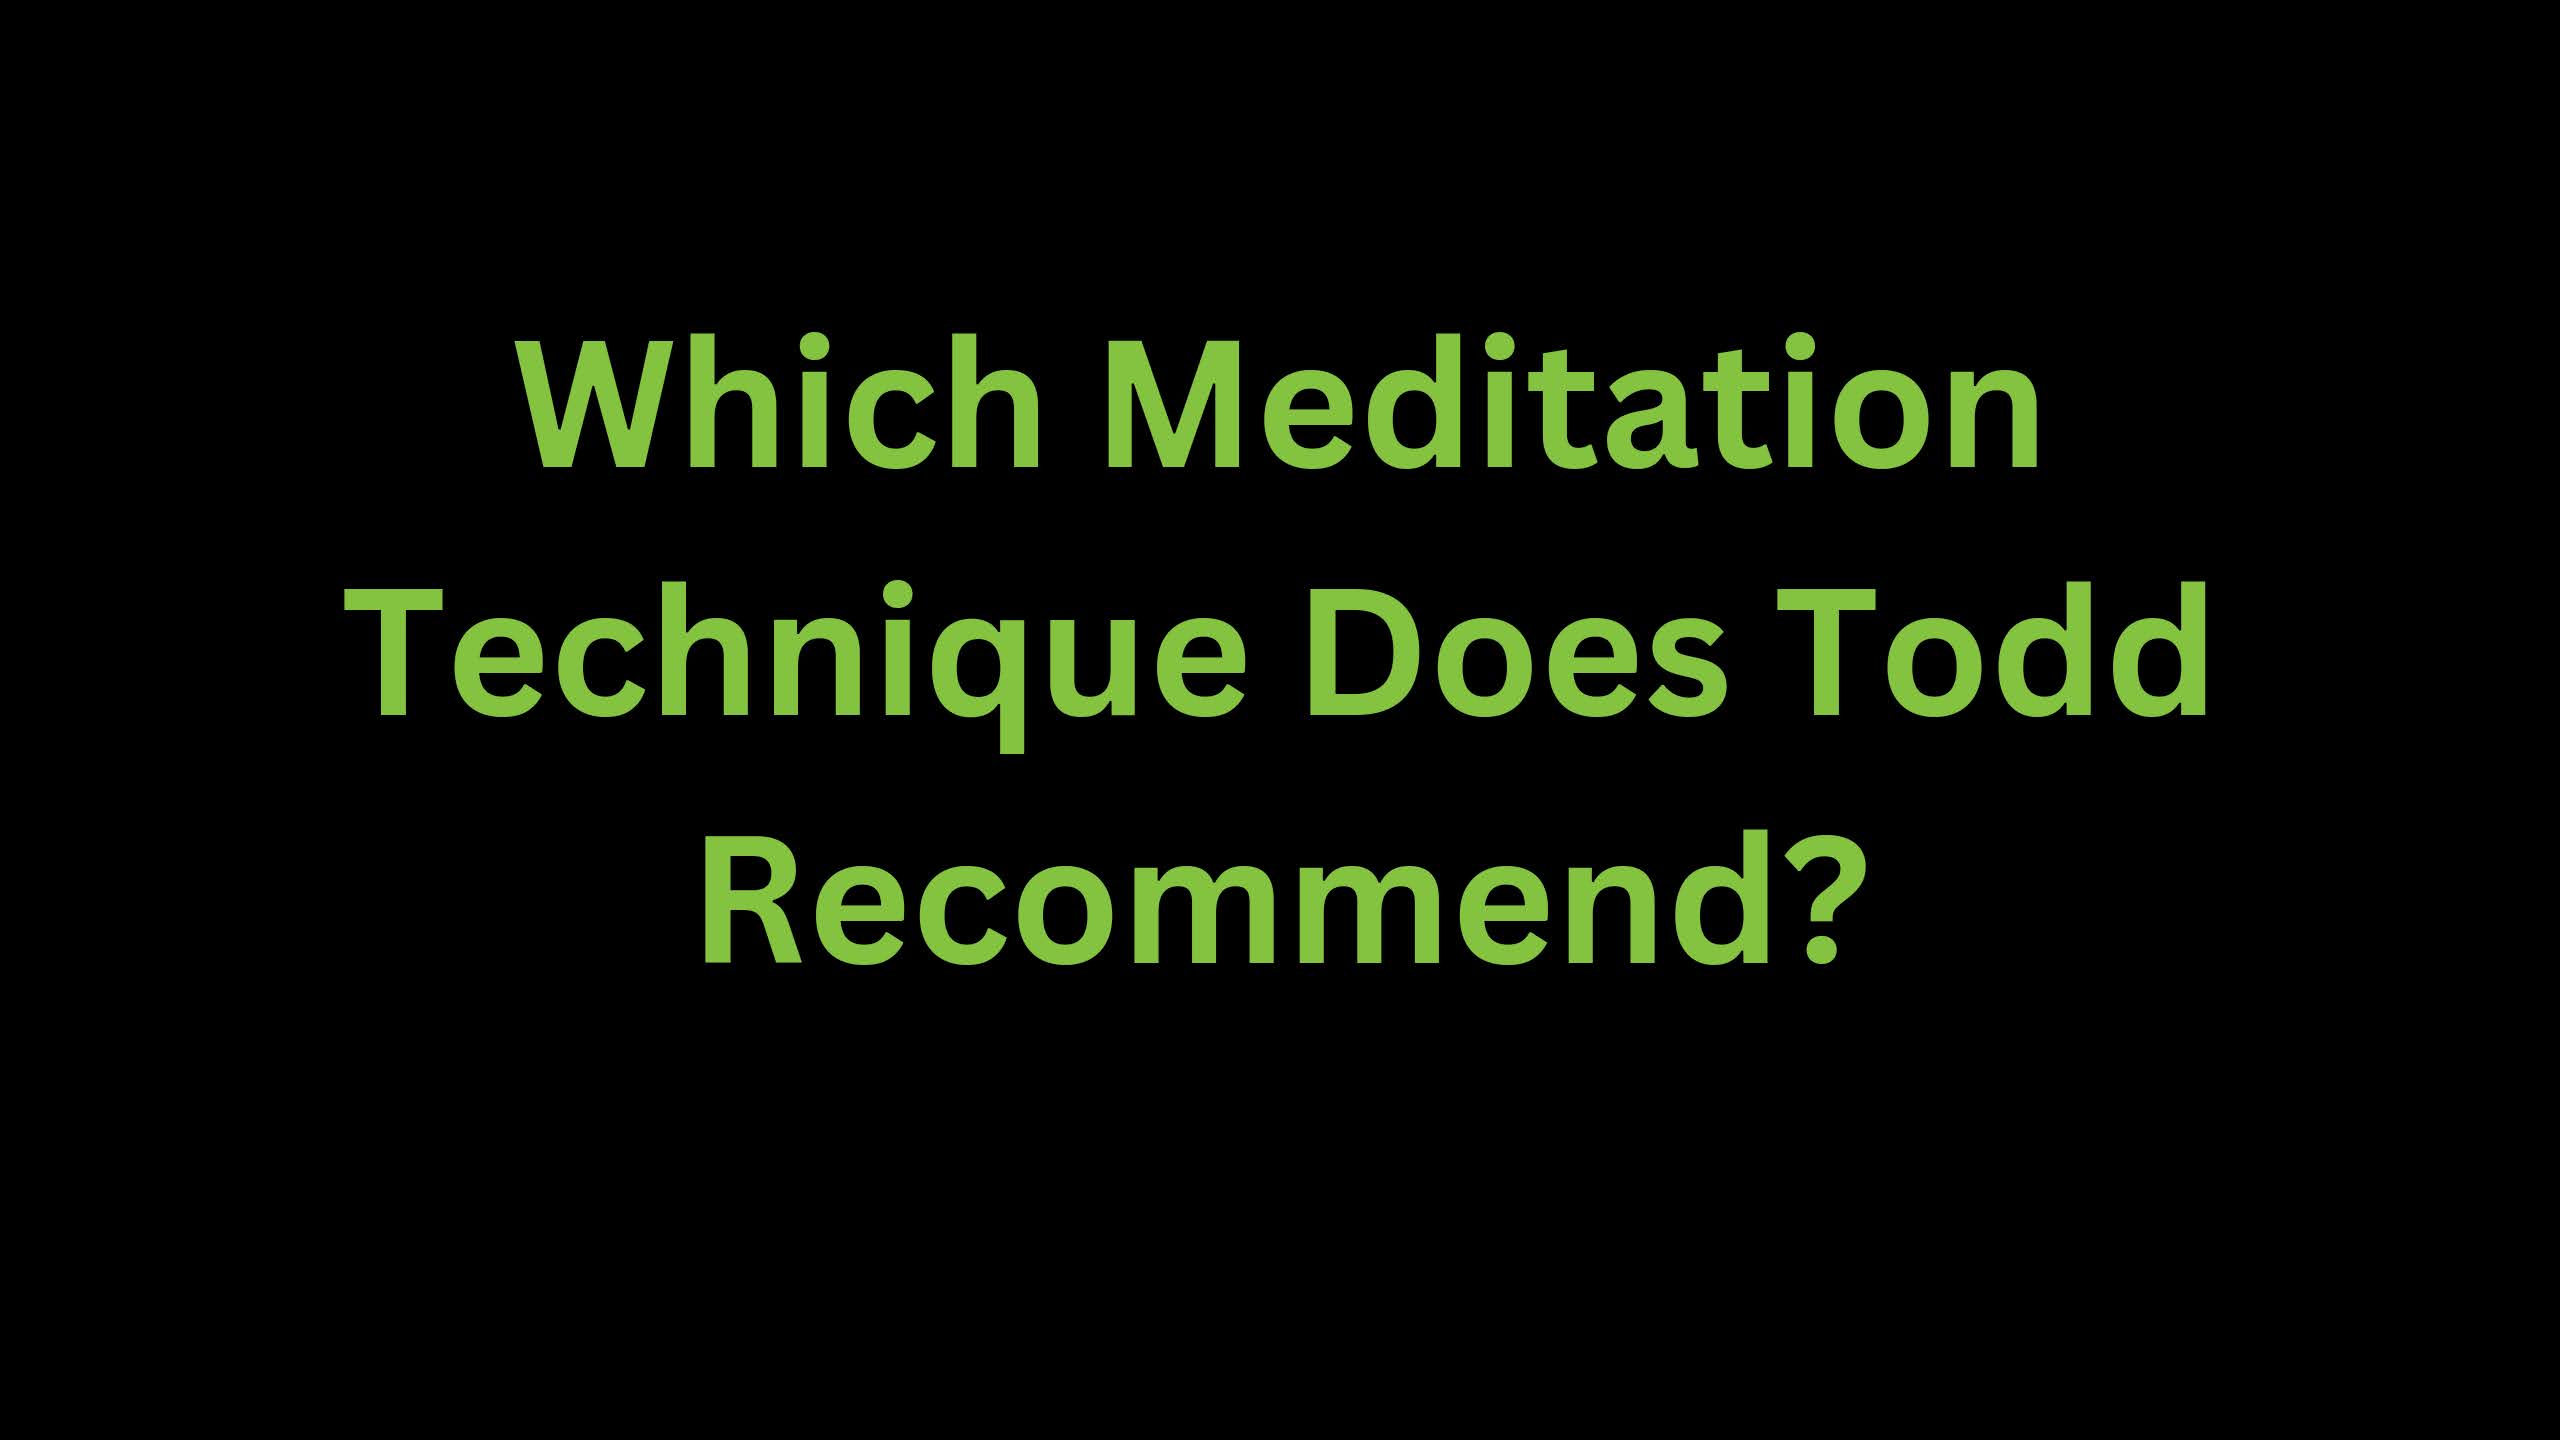 You are currently viewing Which Meditation Technique Todd Recommends